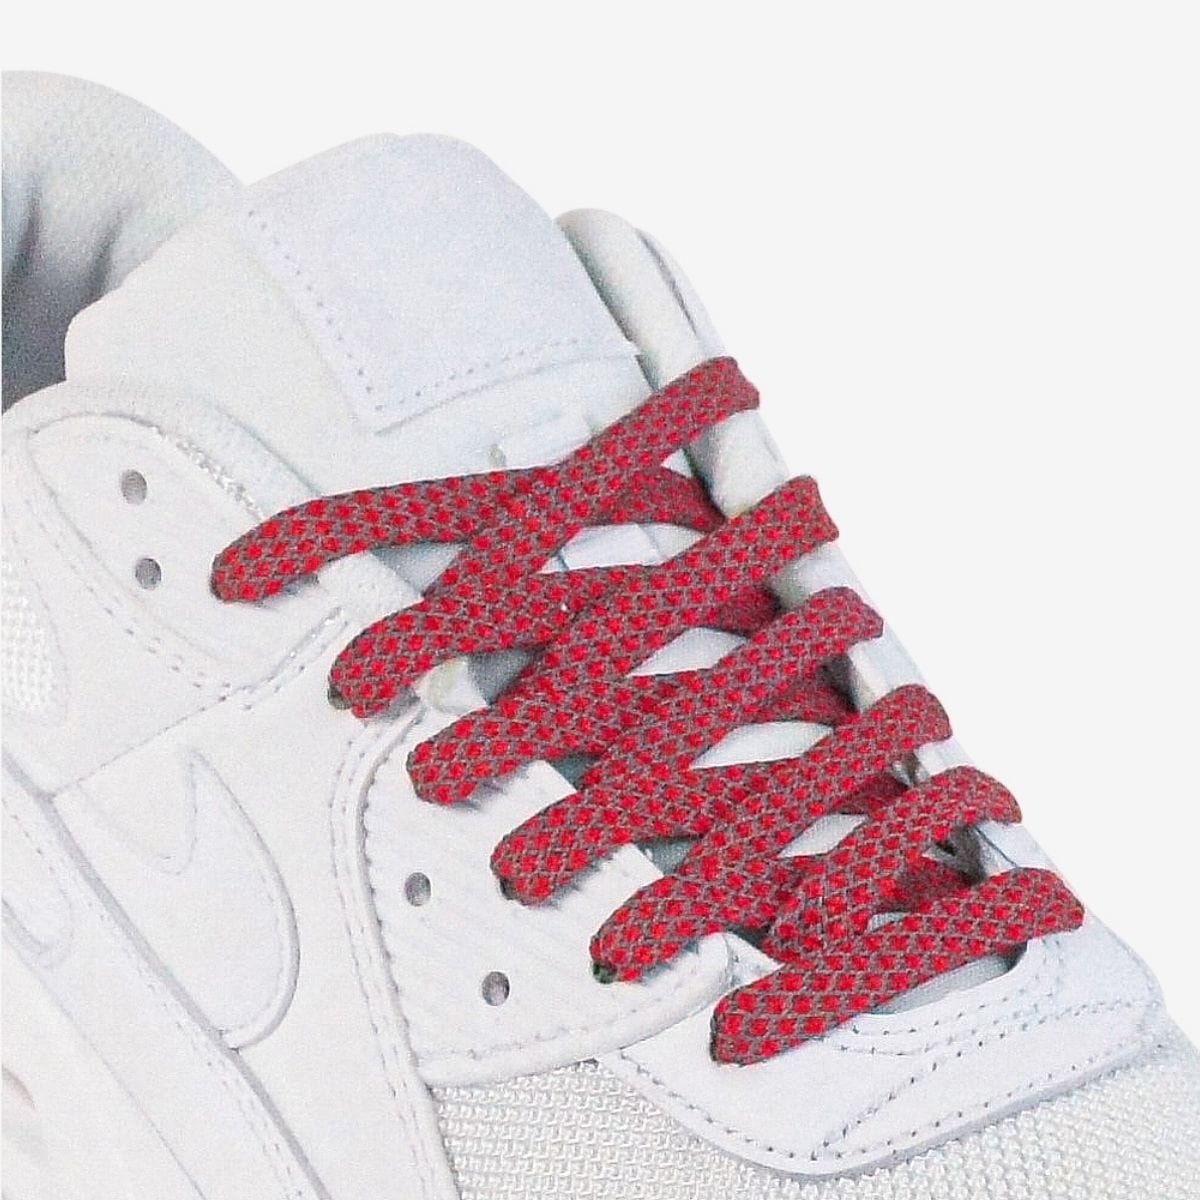 reflective-flat-shoelaces-in-red-suitable-for-popular-sneakers